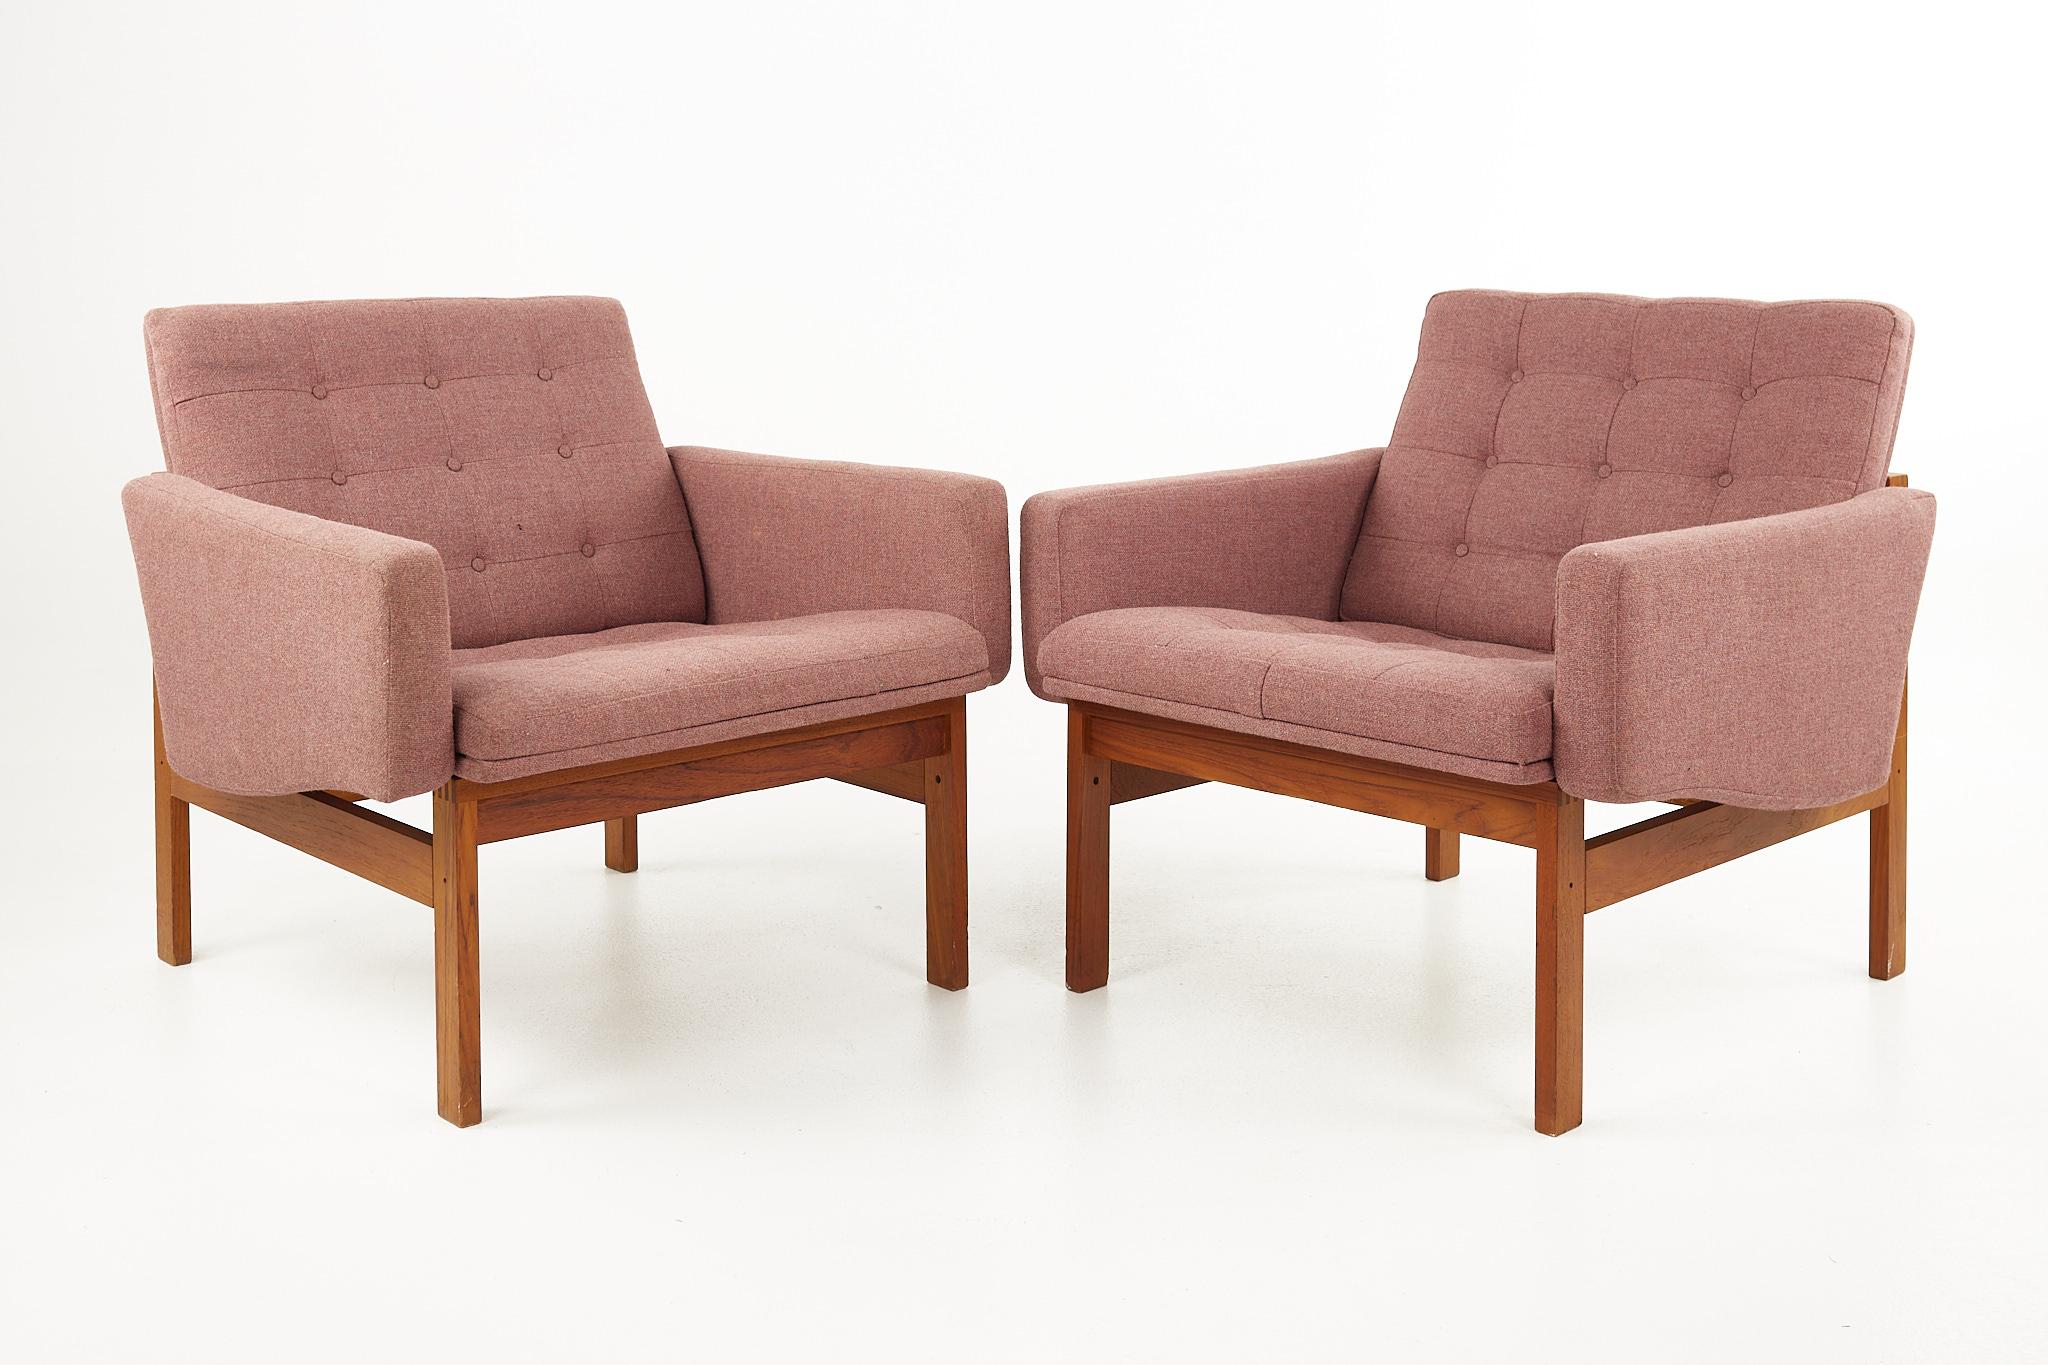 Poul Cadovius mid century teak lounge chairs - a pair

Each chair measures: 28 wide x 28.5 deep x 27.5 high, with a seat height of 15 inches and arm height/chair clearance of 20 inches

All pieces of furniture can be had in what we call restored